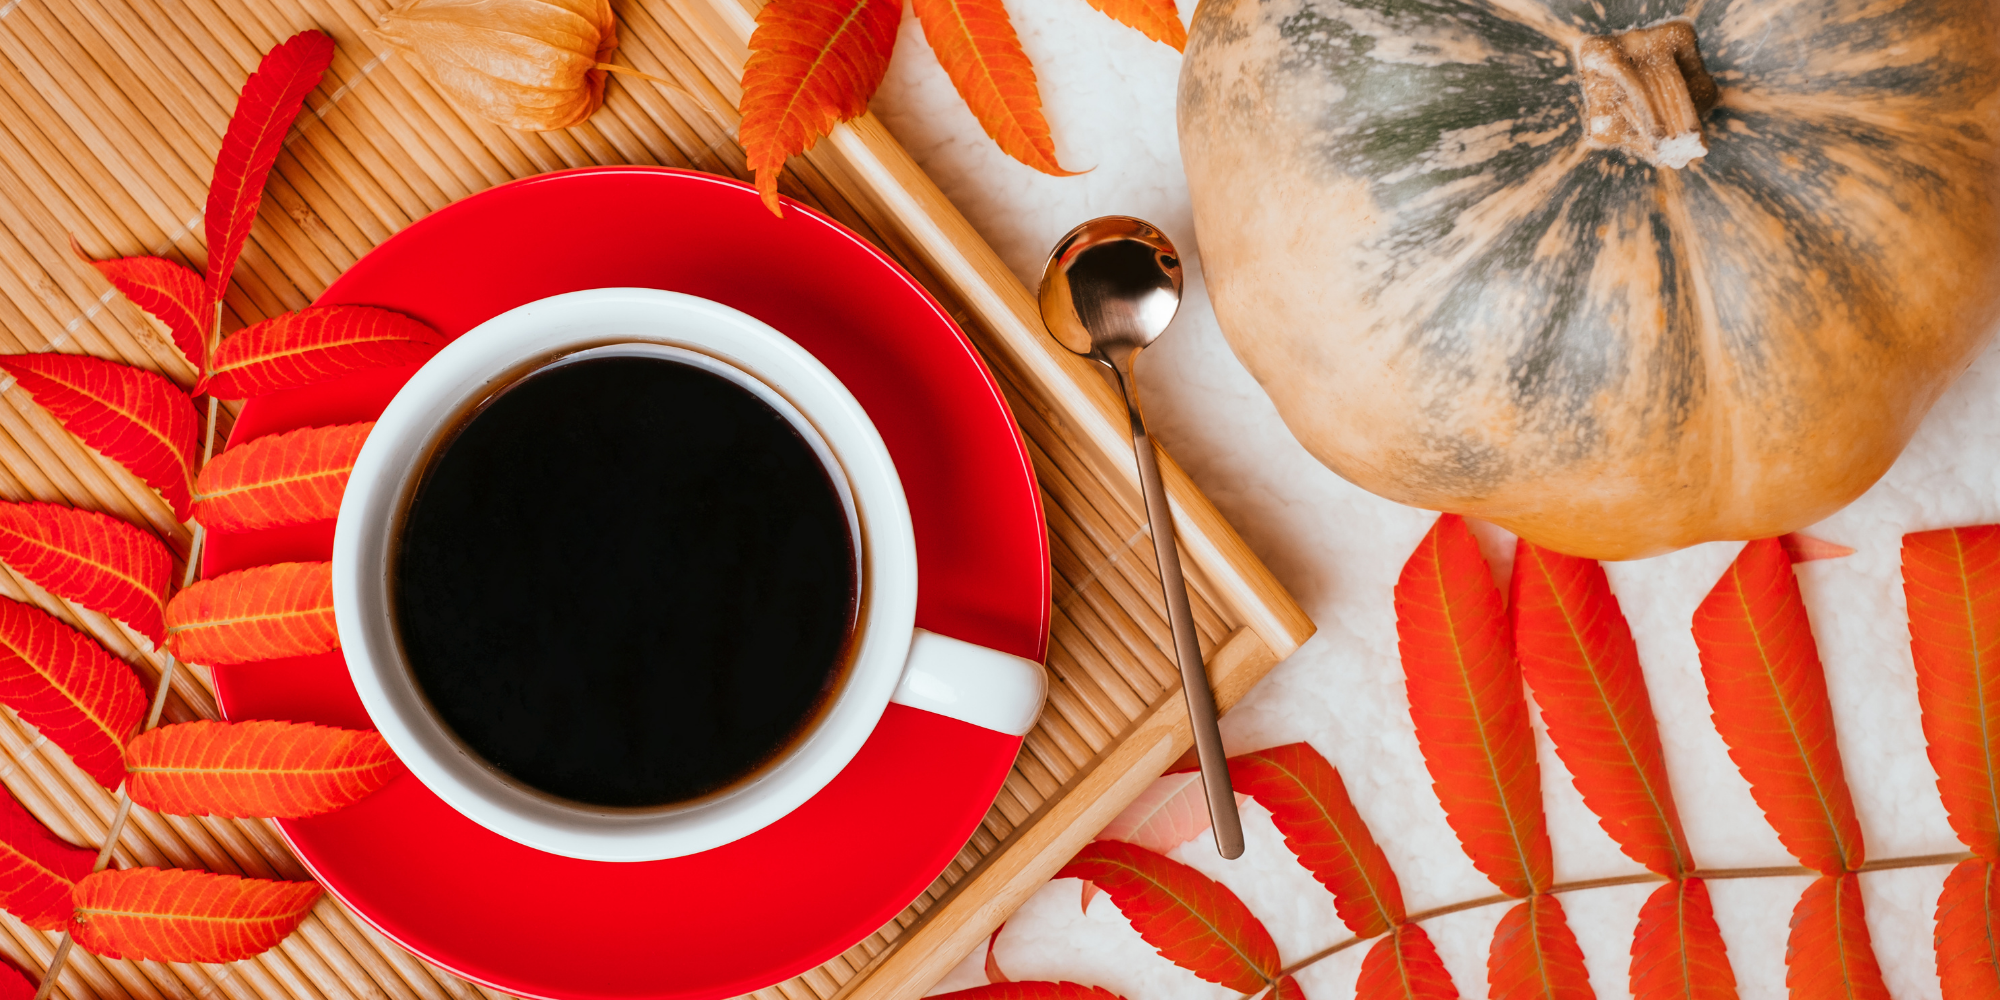 What Your Favorite Fall Drink Says About Your Scent Preference